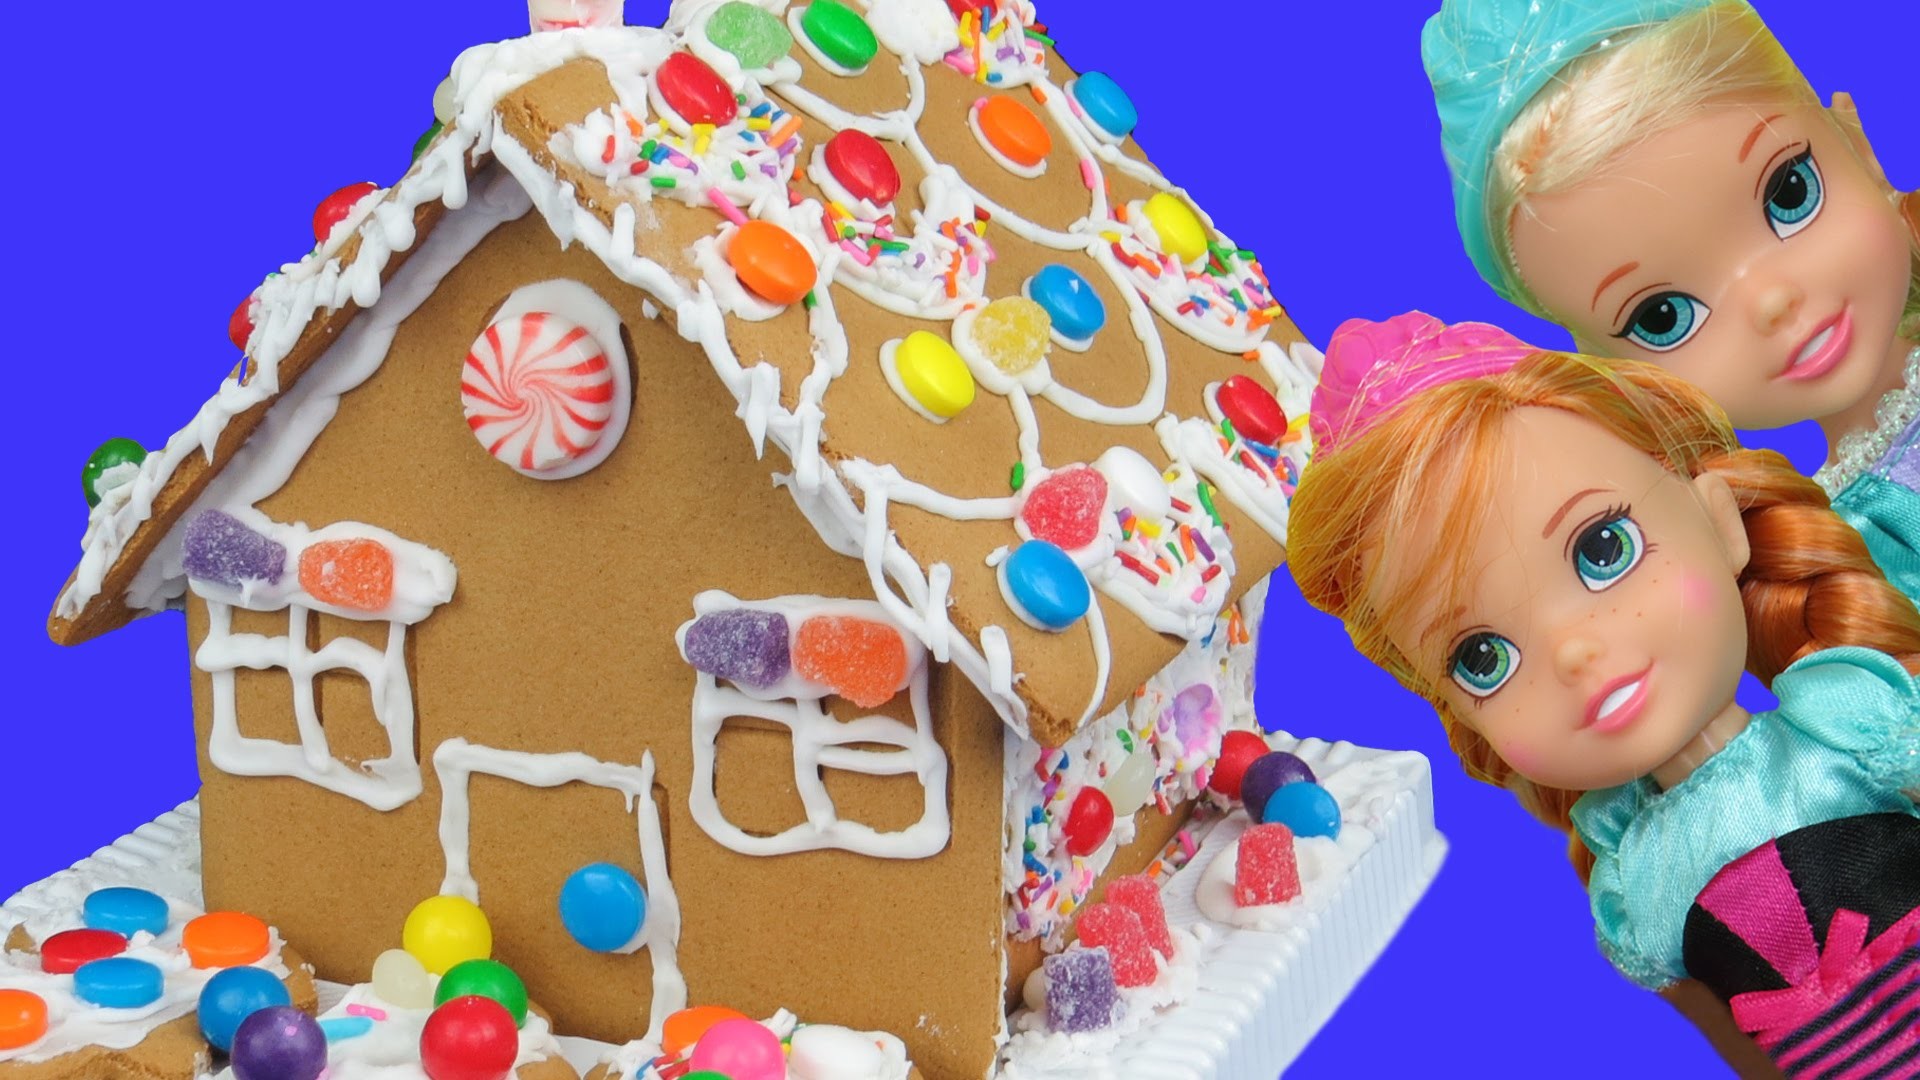 Gingerbread house BUILDING ! ELSA, ANNA toddlers use icing and candy